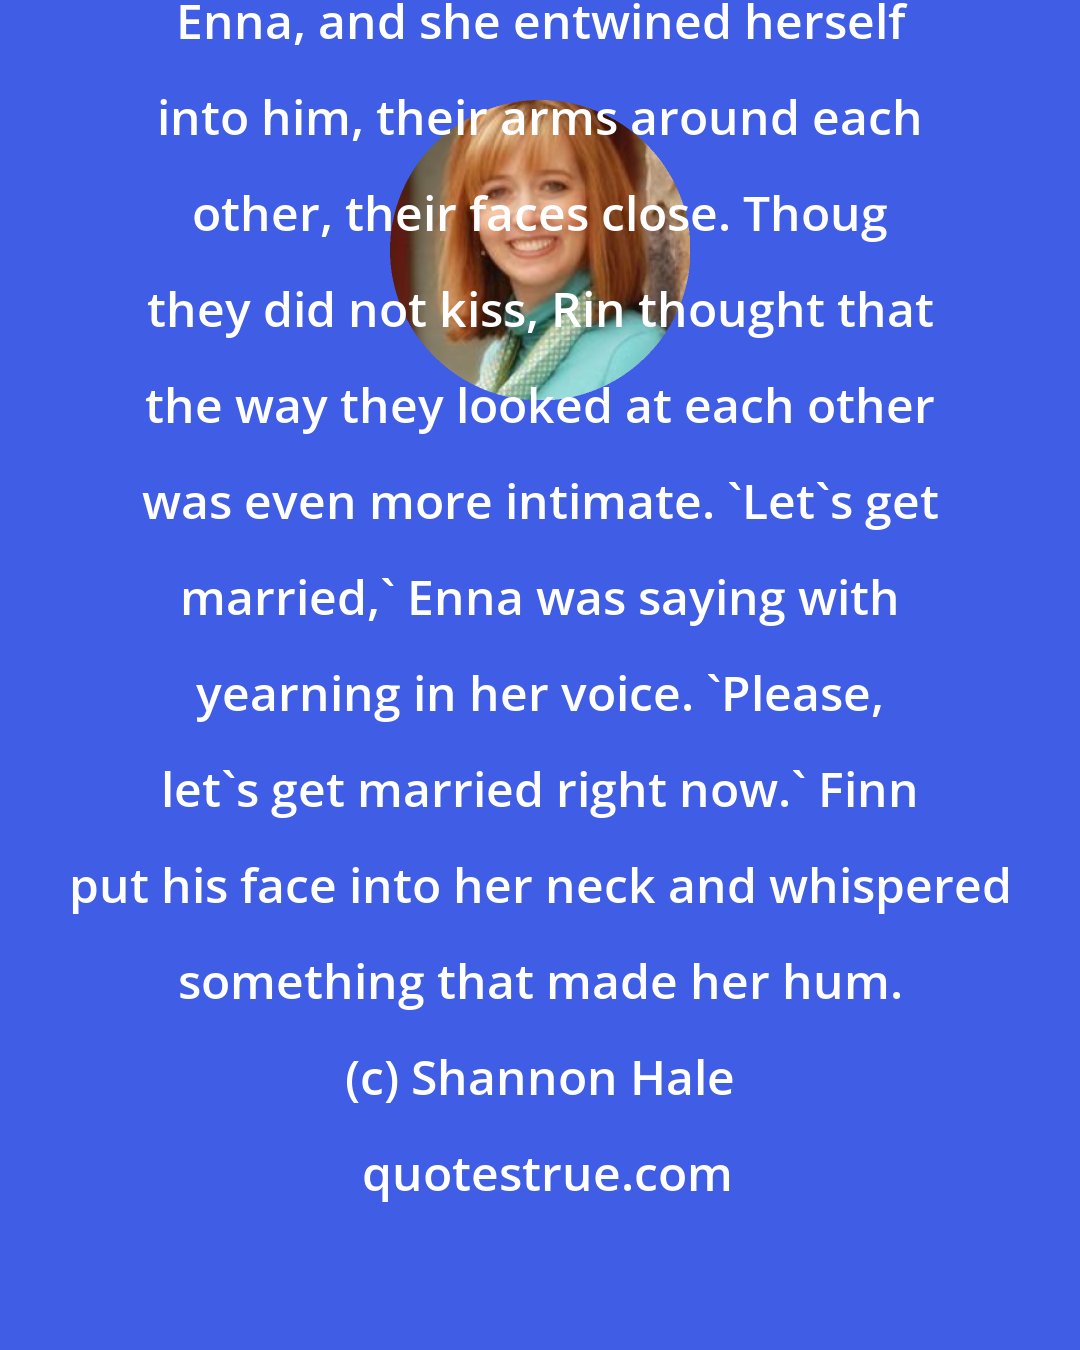 Shannon Hale: Finn leaped from his horse to greet Enna, and she entwined herself into him, their arms around each other, their faces close. Thoug they did not kiss, Rin thought that the way they looked at each other was even more intimate. 'Let's get married,' Enna was saying with yearning in her voice. 'Please, let's get married right now.' Finn put his face into her neck and whispered something that made her hum.